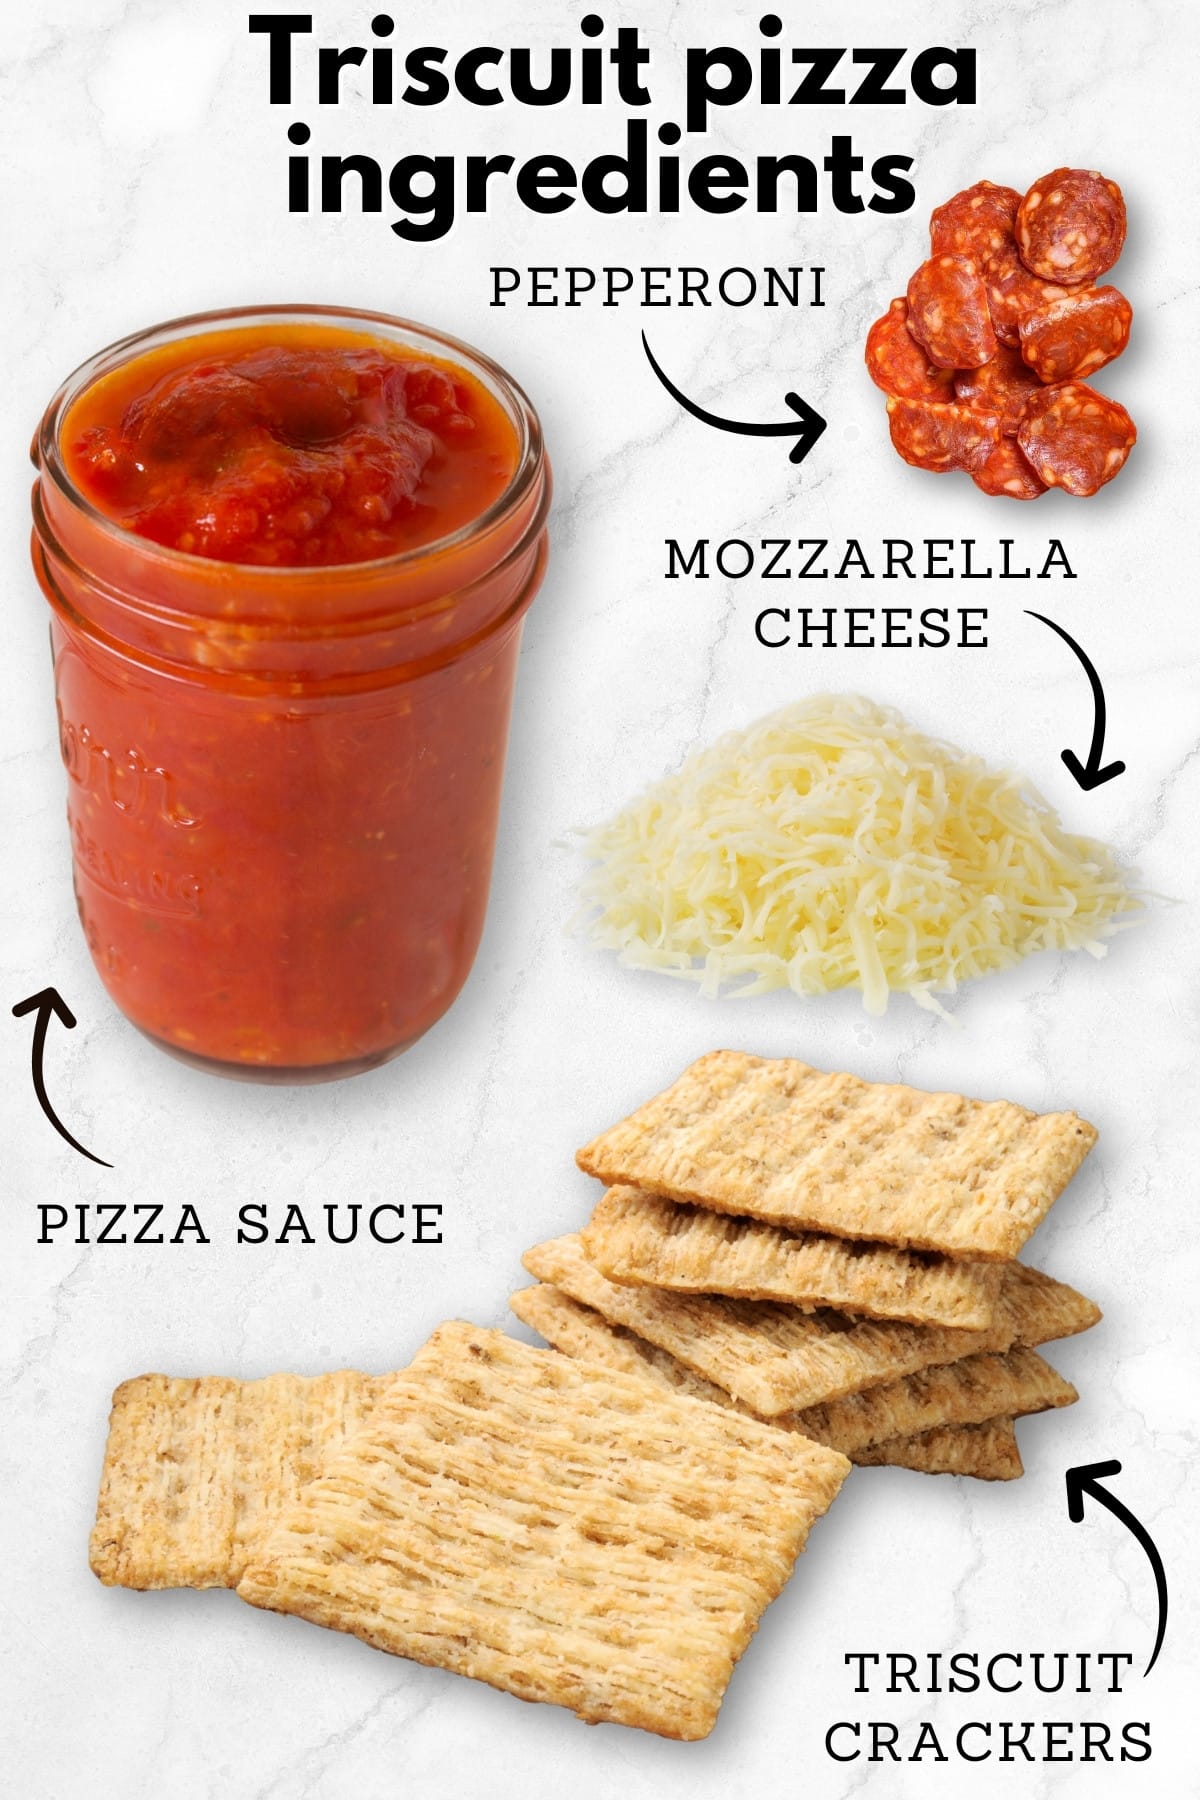 triscuit pizza ingredients with pizza sauce, shredded cheese, triscuit crackers and sliced pepperoni